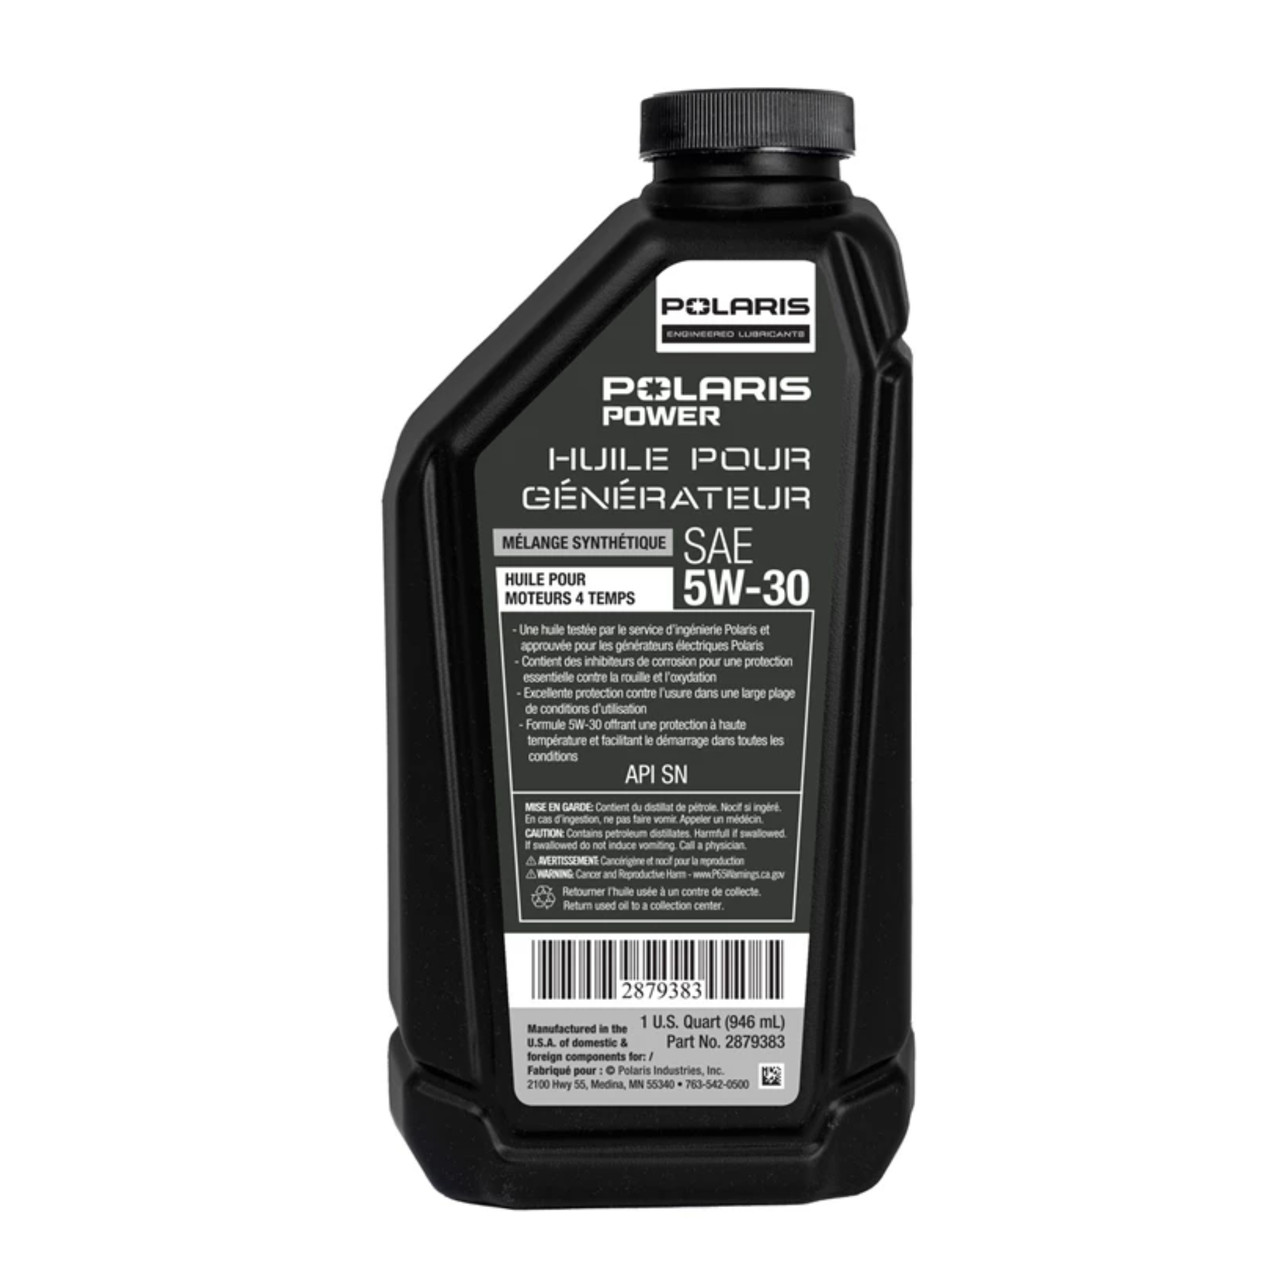 Polaris New OEM Synthetic Blend 4-Cycle Engine Generator Oil, SAE 5W-30, 2879383